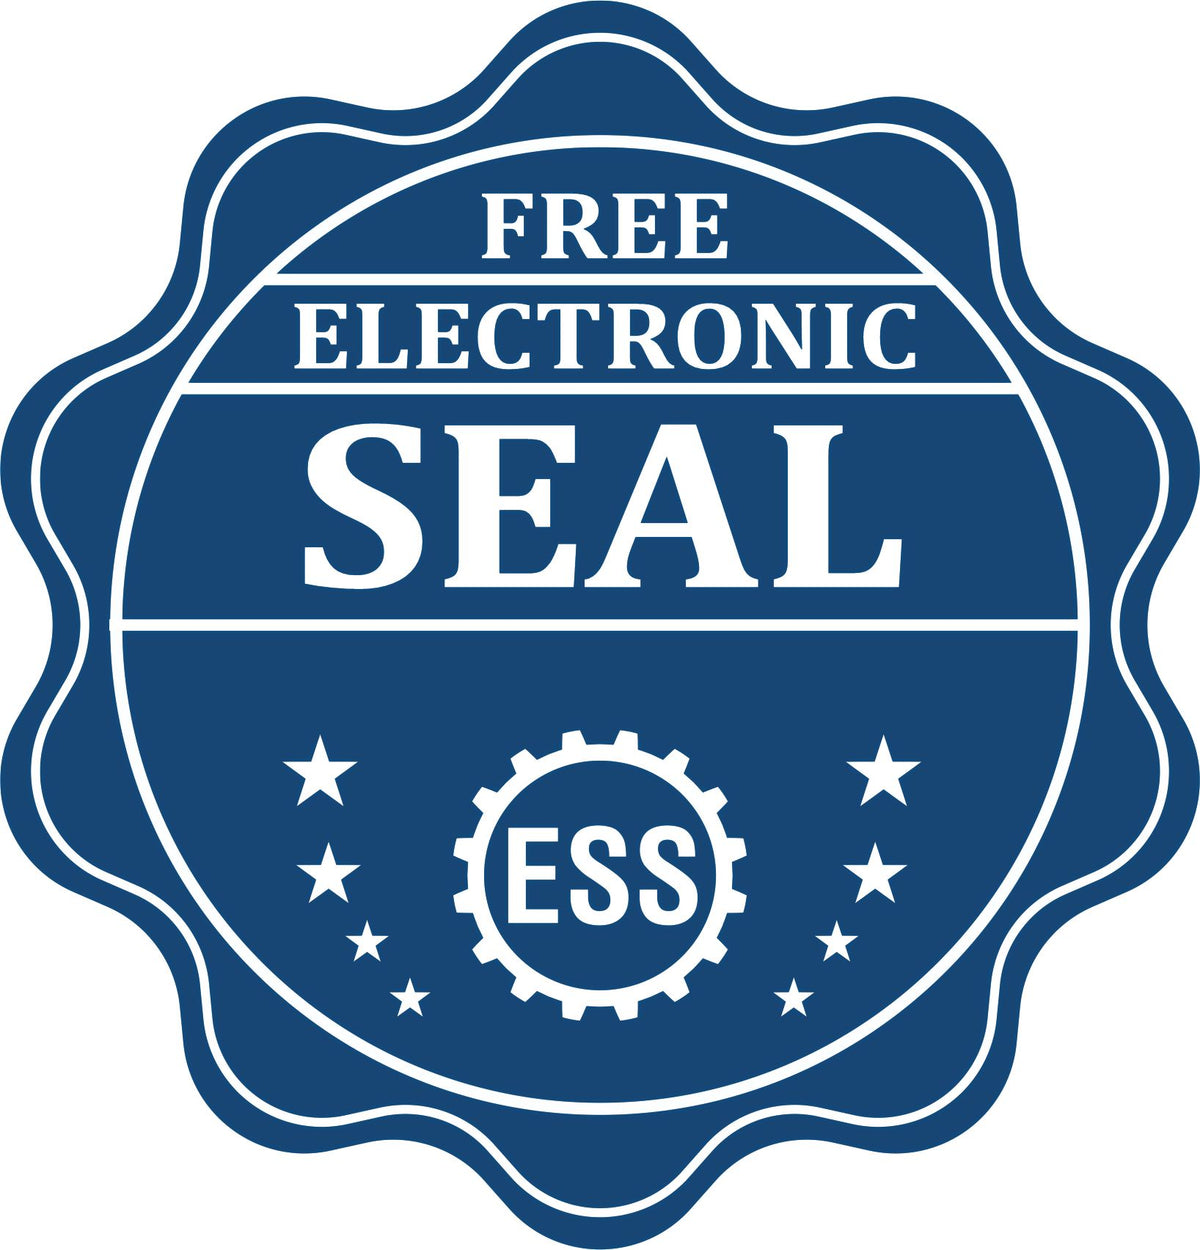 A badge showing a free electronic seal for the Extended Long Reach Guam Surveyor Embosser with stars and the ESS gear on the emblem.